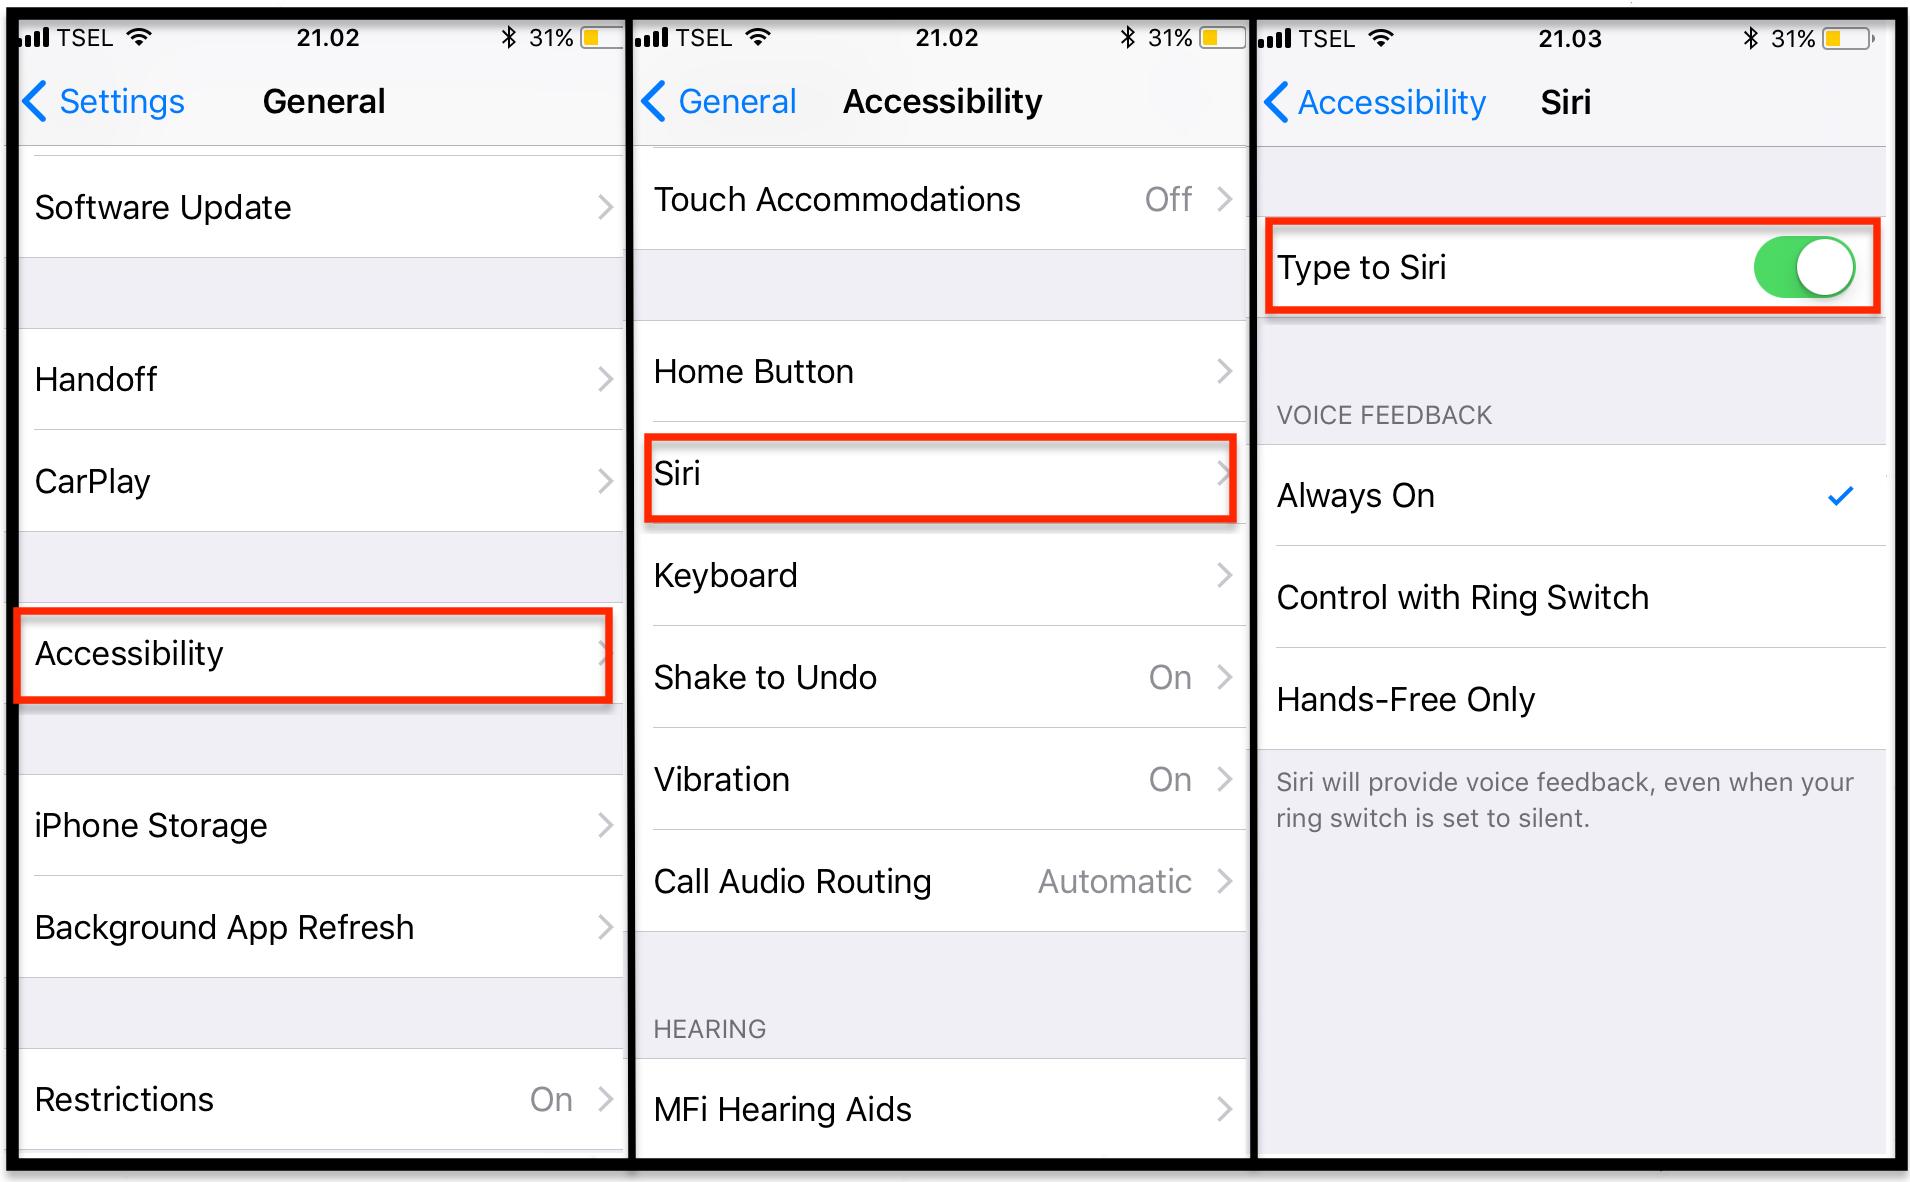 How To Enable Type To Siri In iOS 11